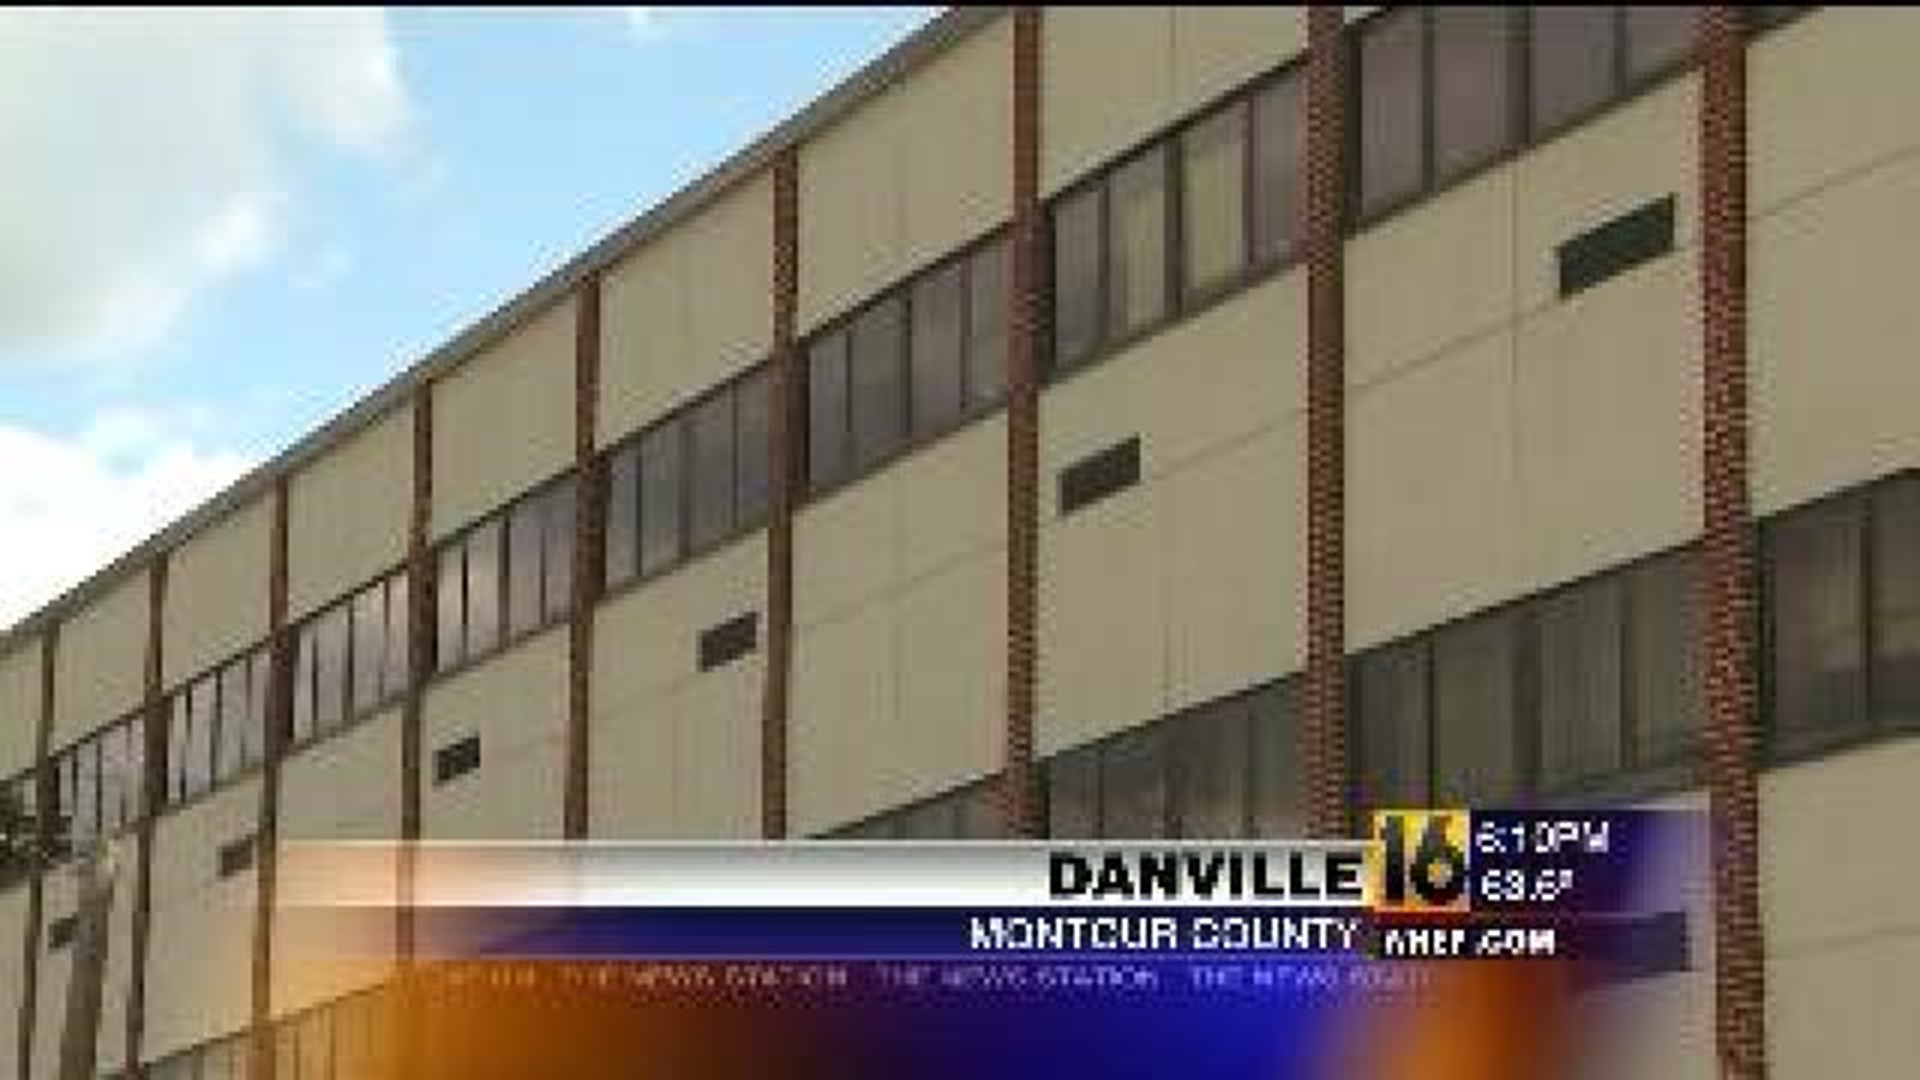 School District Abandons Plans for Middle School